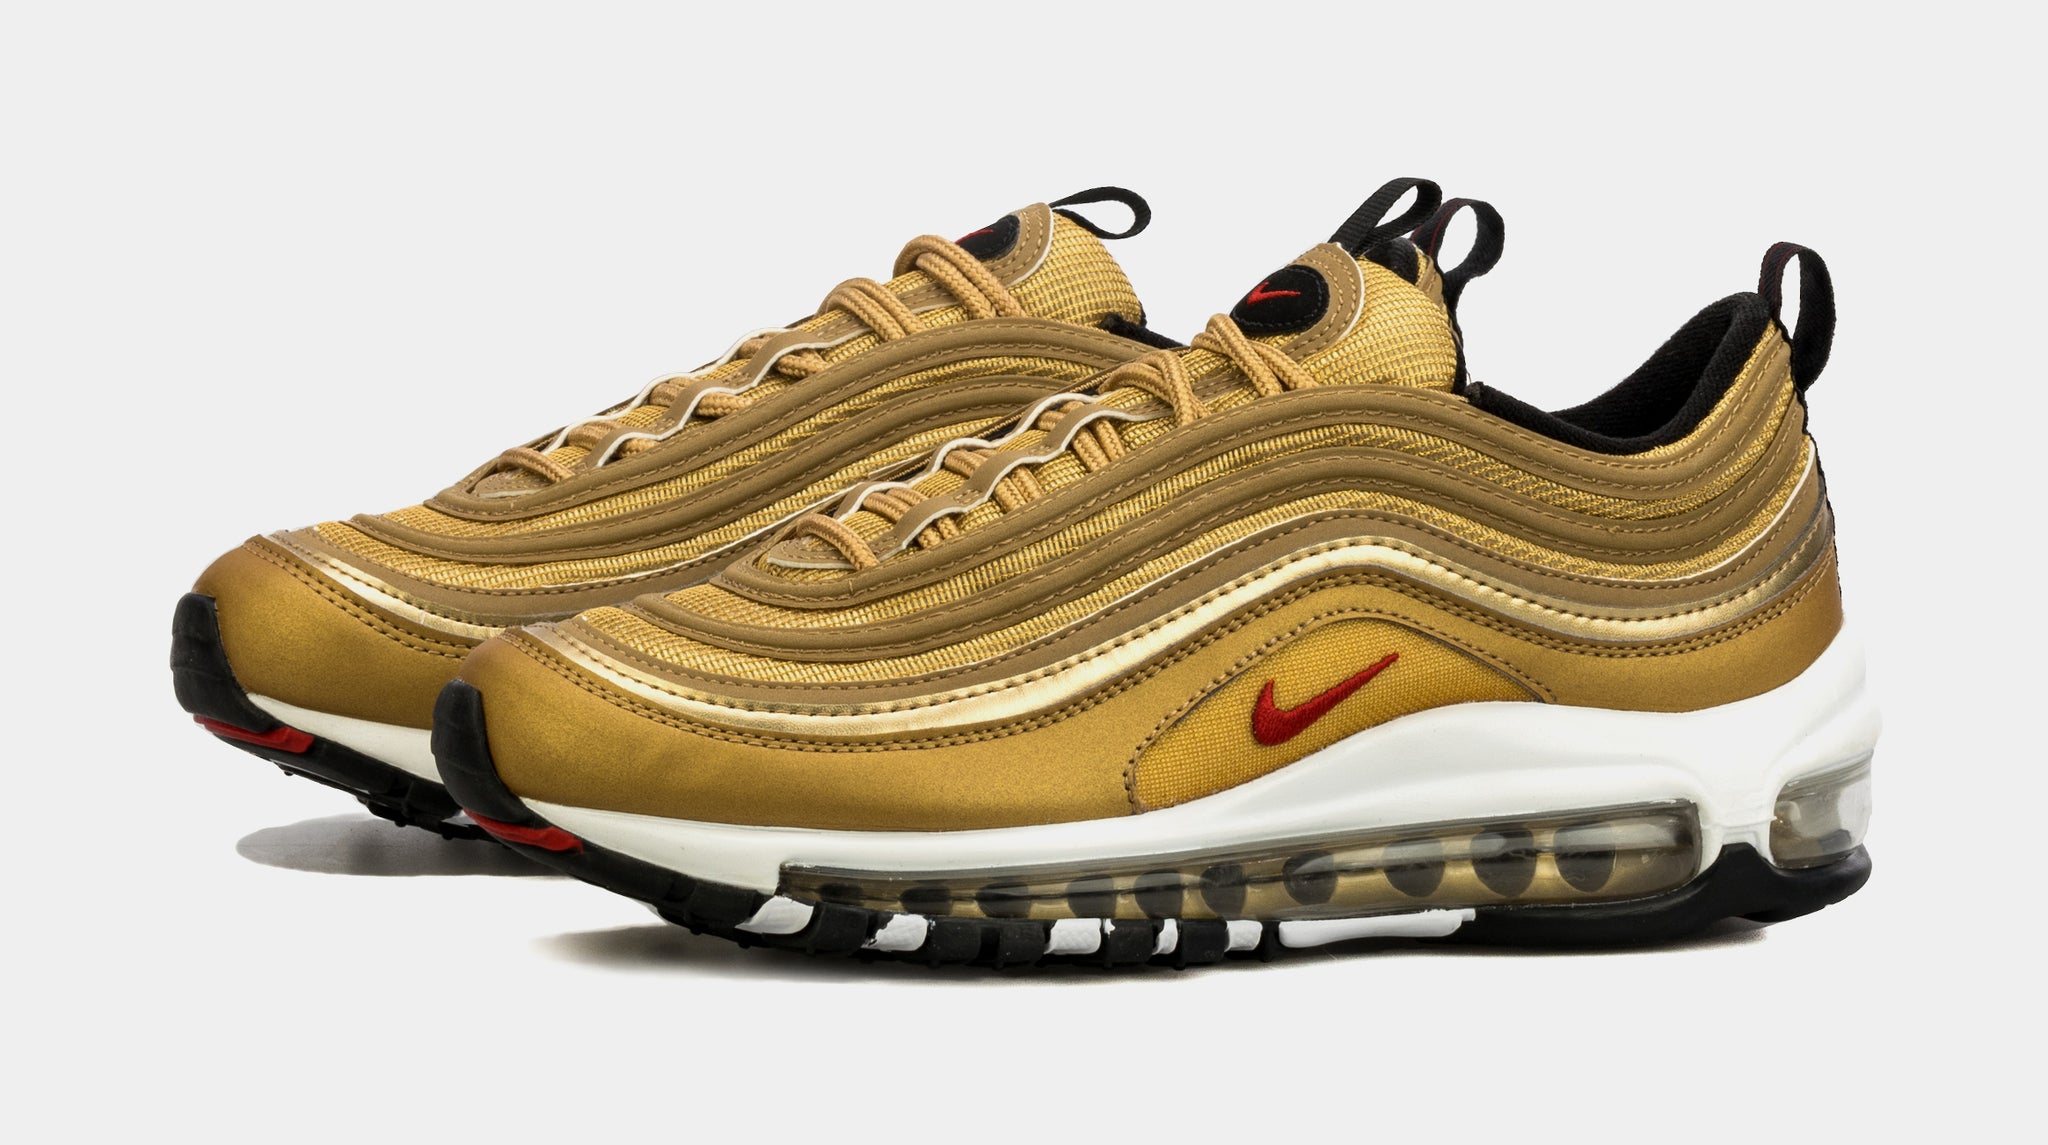 Comparable representante Intolerable Nike Air Max 97 Gold Bullet Grade School Lifestyle Shoes Gold 918890-700 –  Shoe Palace